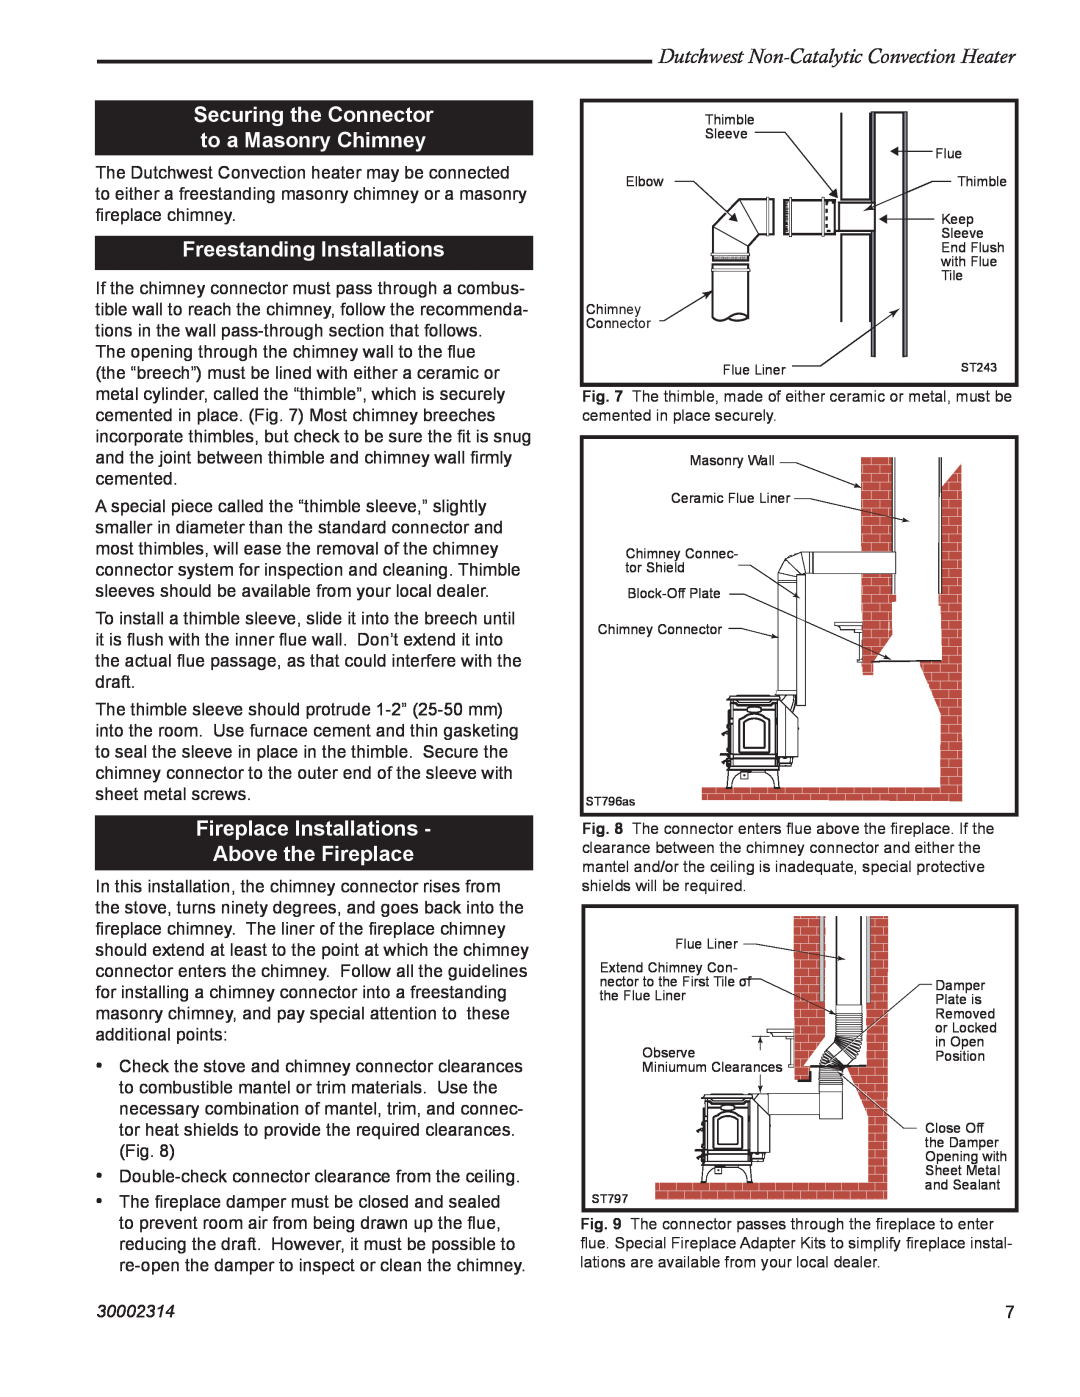 Vermont Casting 2477 manual Securing the Connector to a Masonry Chimney, Freestanding Installations, 30002314 